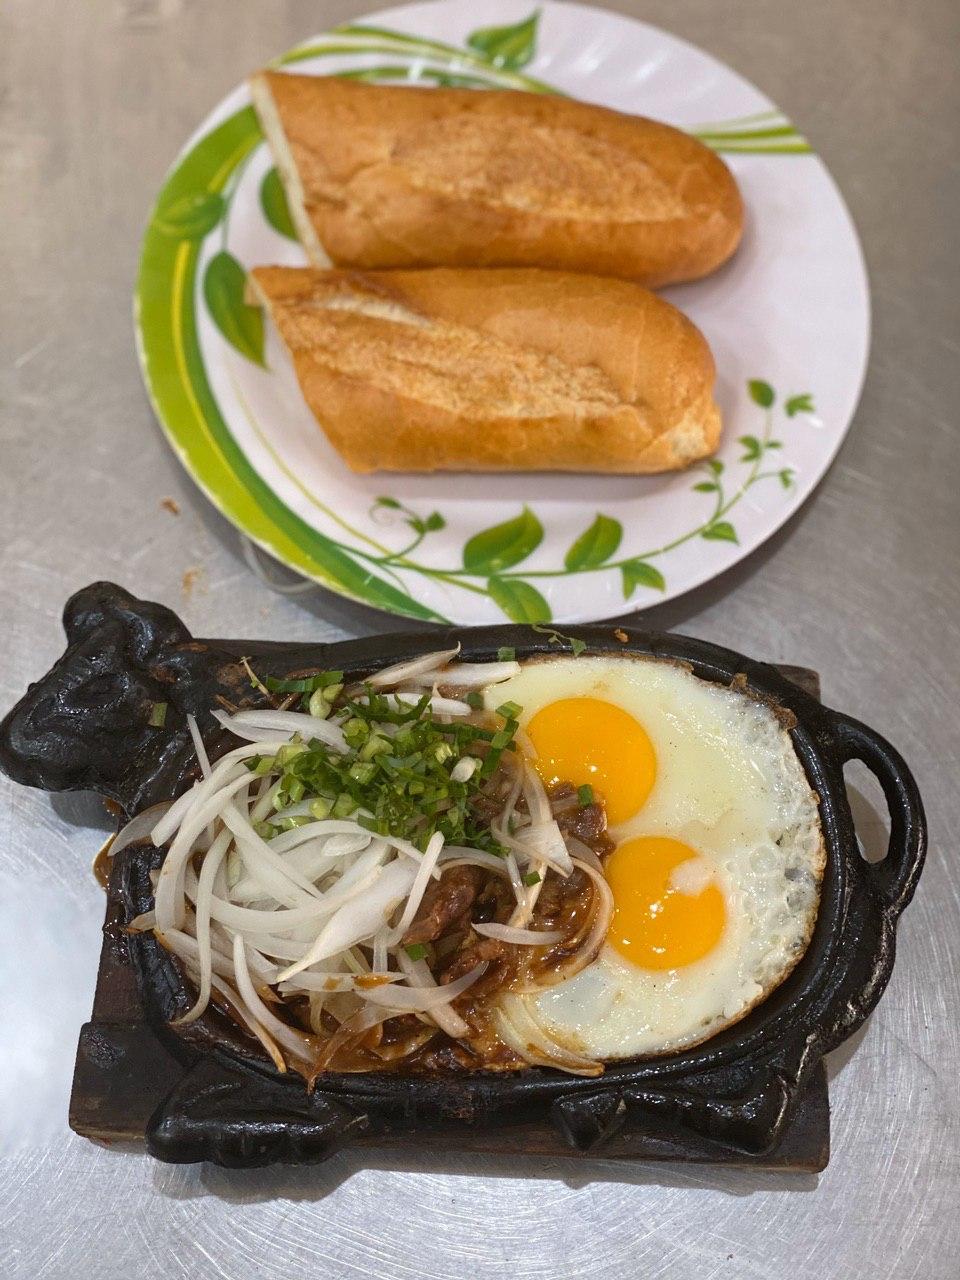 10.Beef on Hot Pan with Bread (Extra Beef ,Egg)